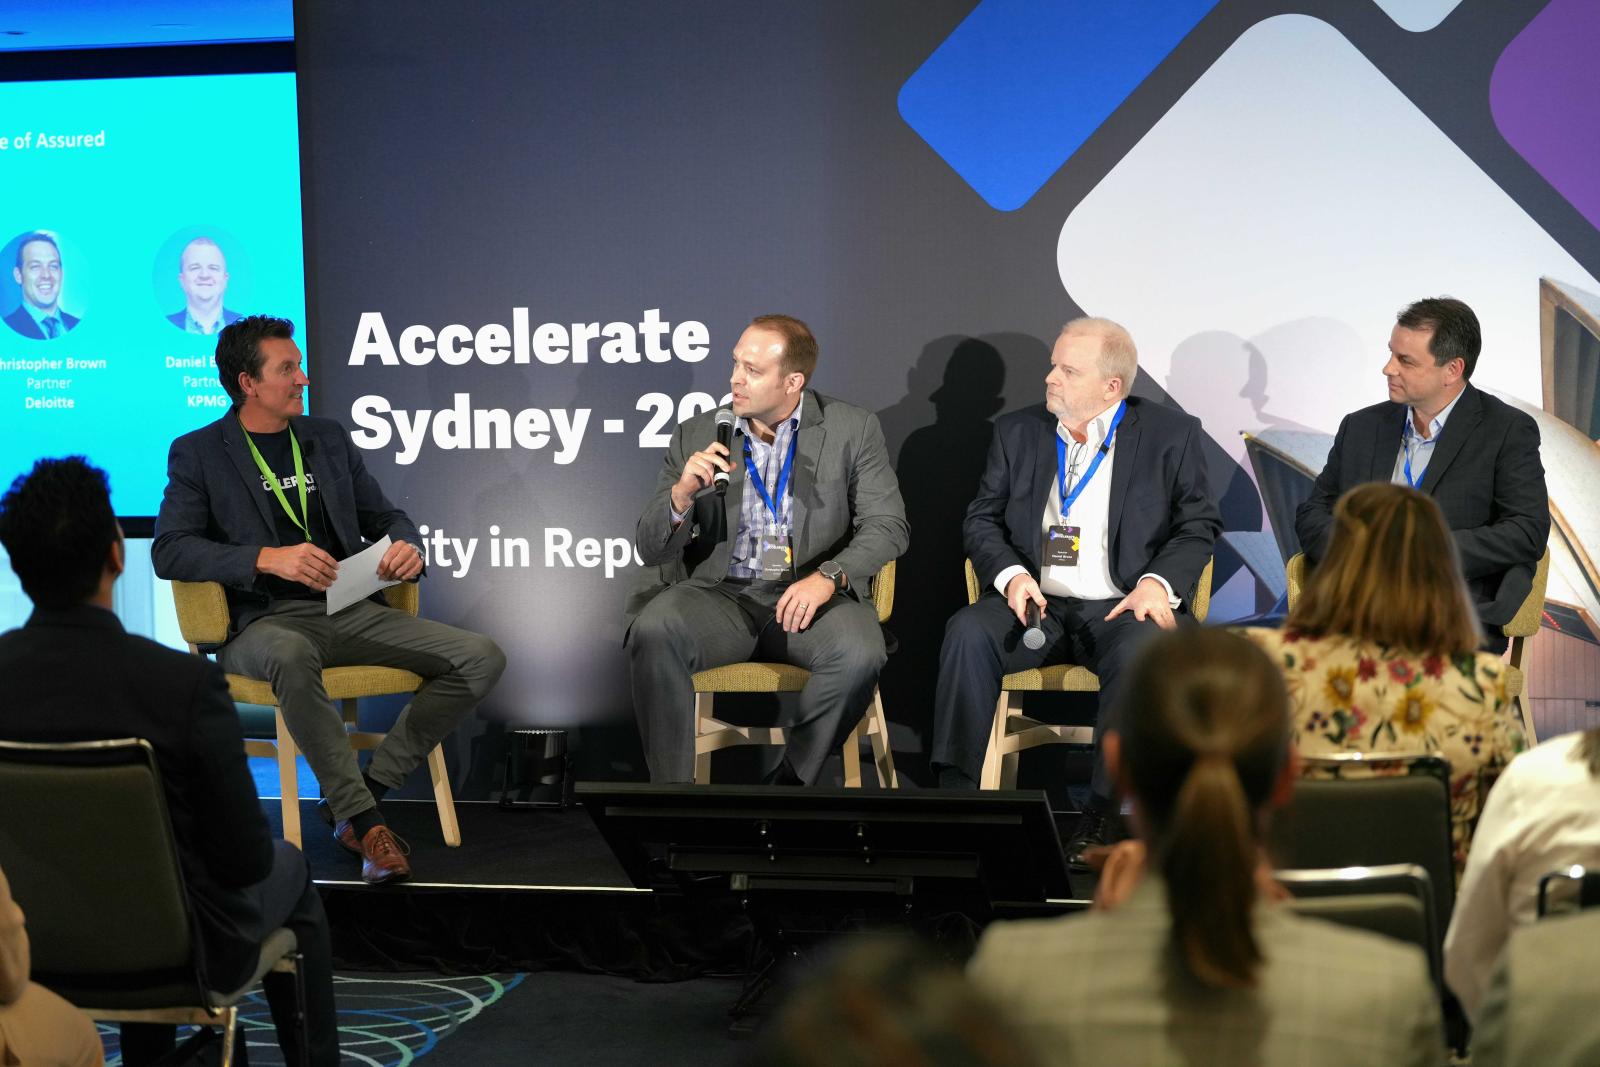 Business Leaders Discuss Unity in Reporting at Accelerate Sydney 2023